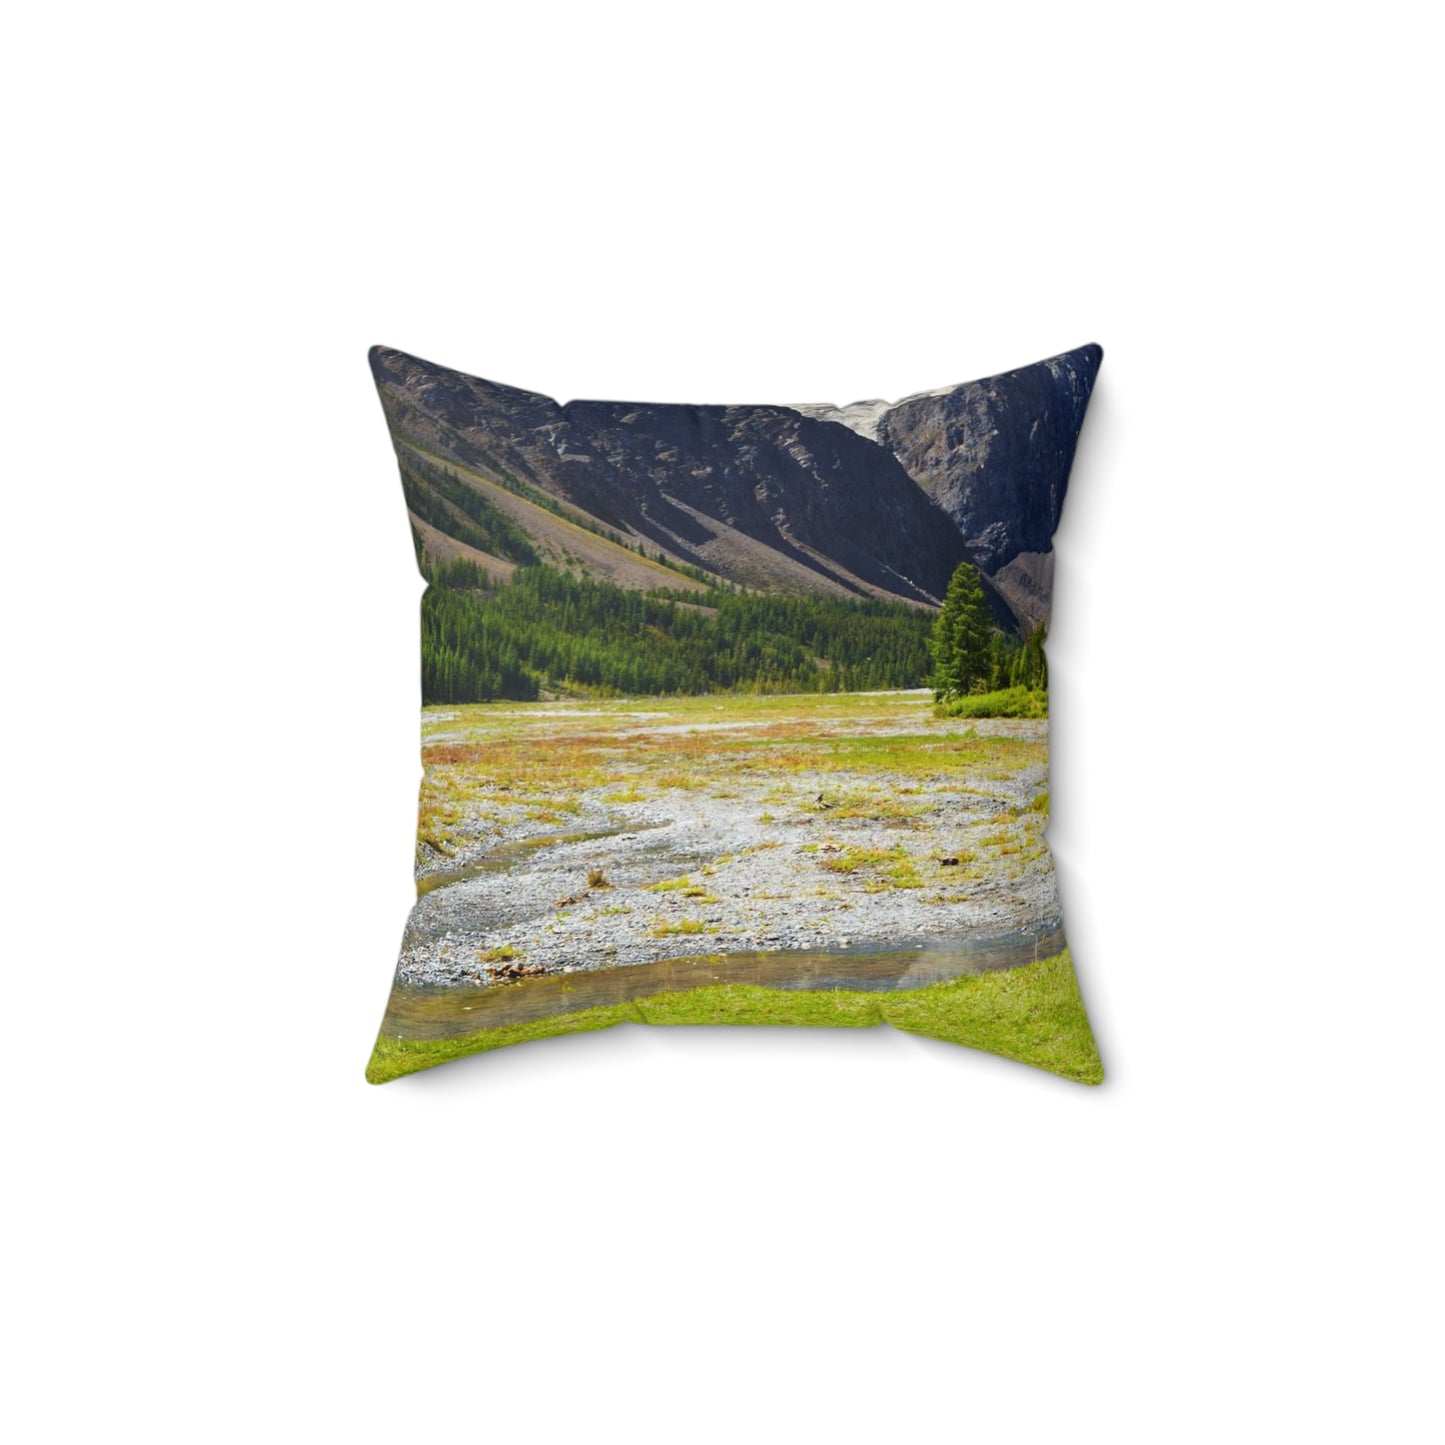 Horses in the Mountains  Square Pillow